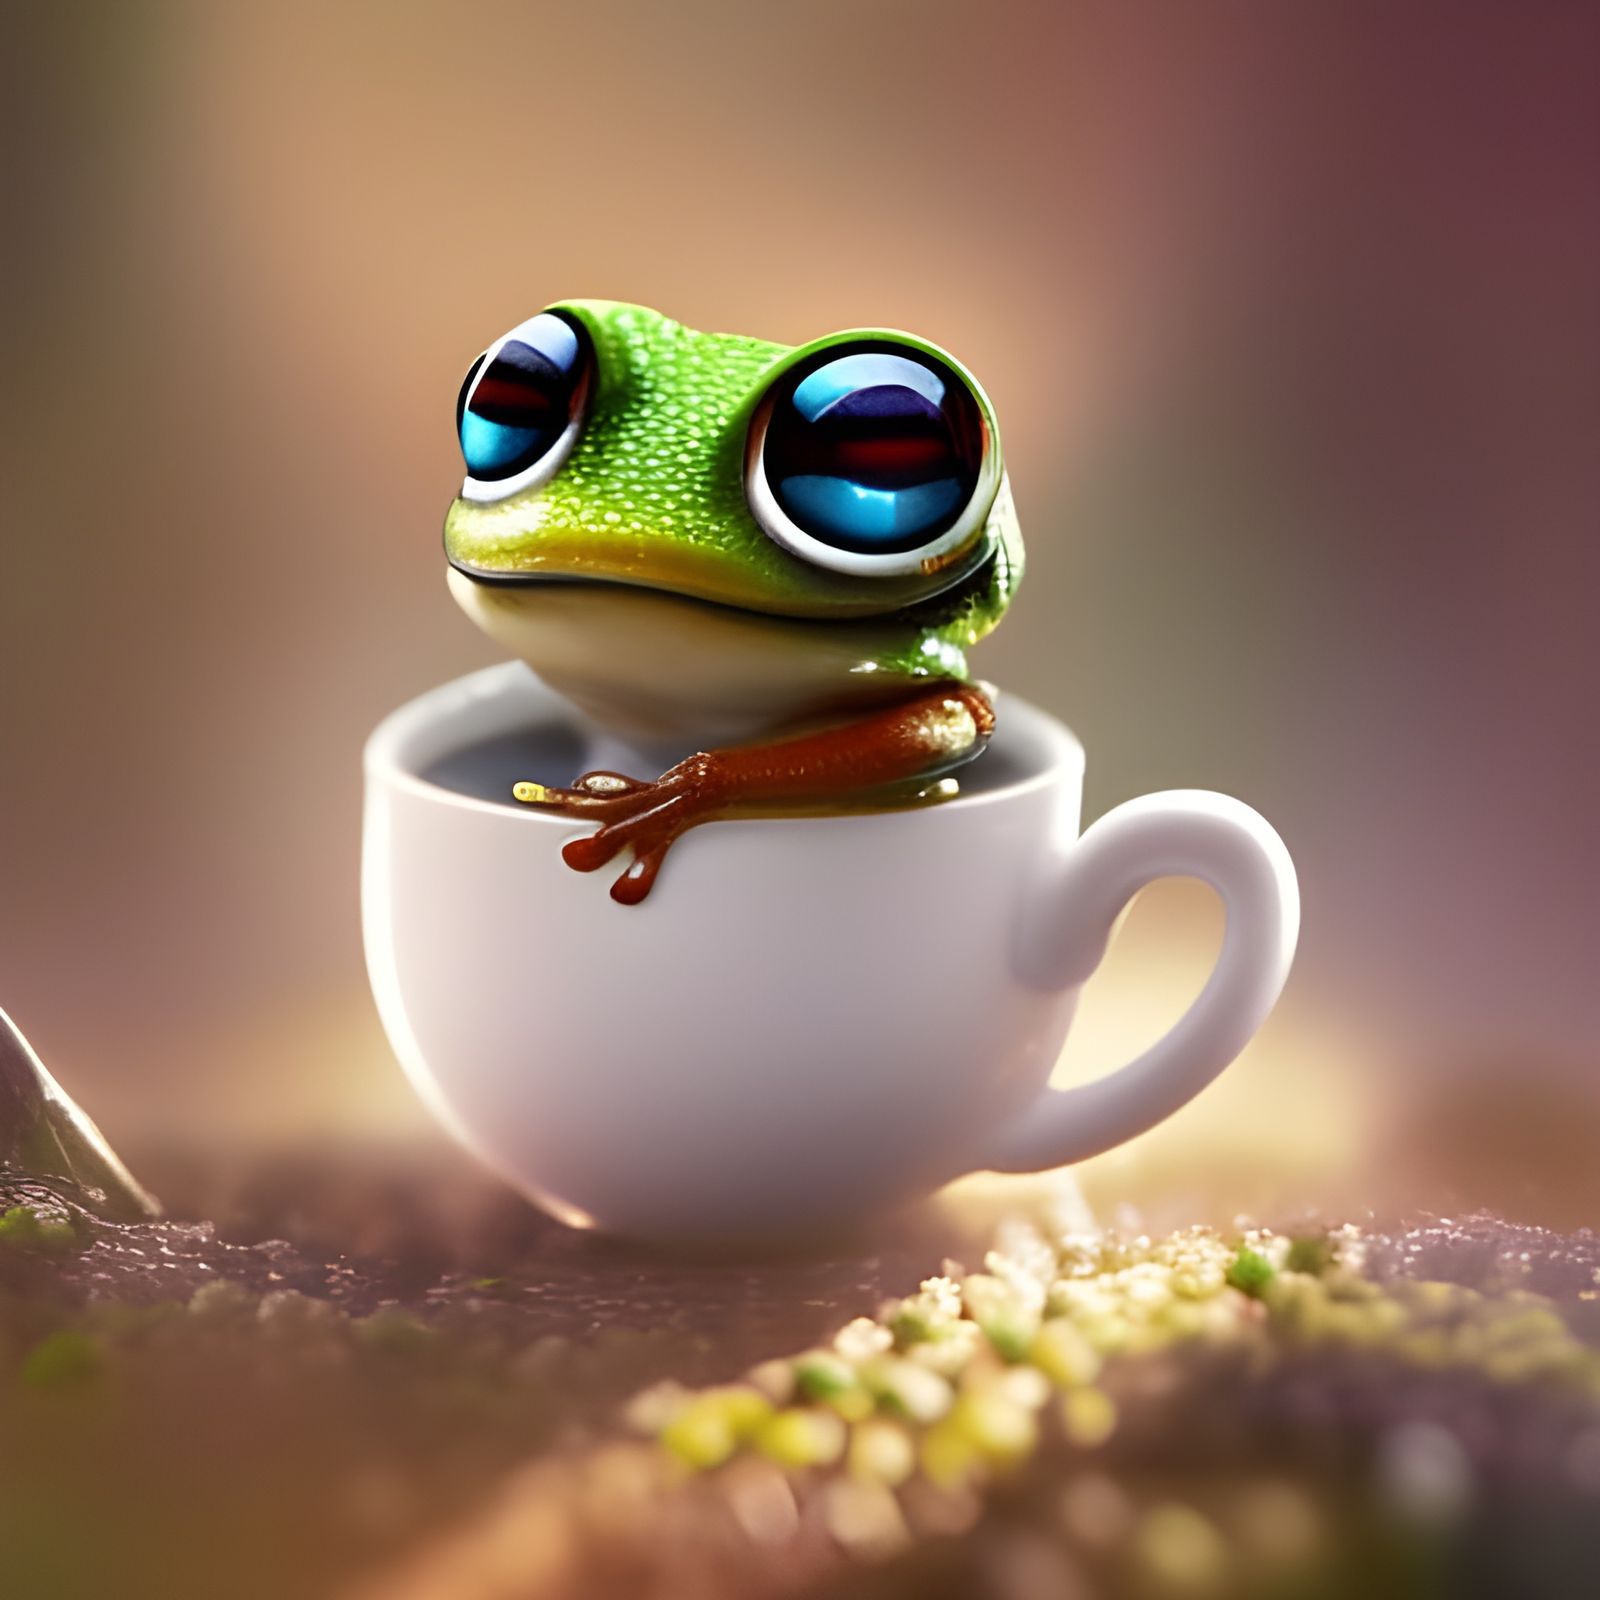 Insanely cute baby frog in teacup - AI Generated Artwork